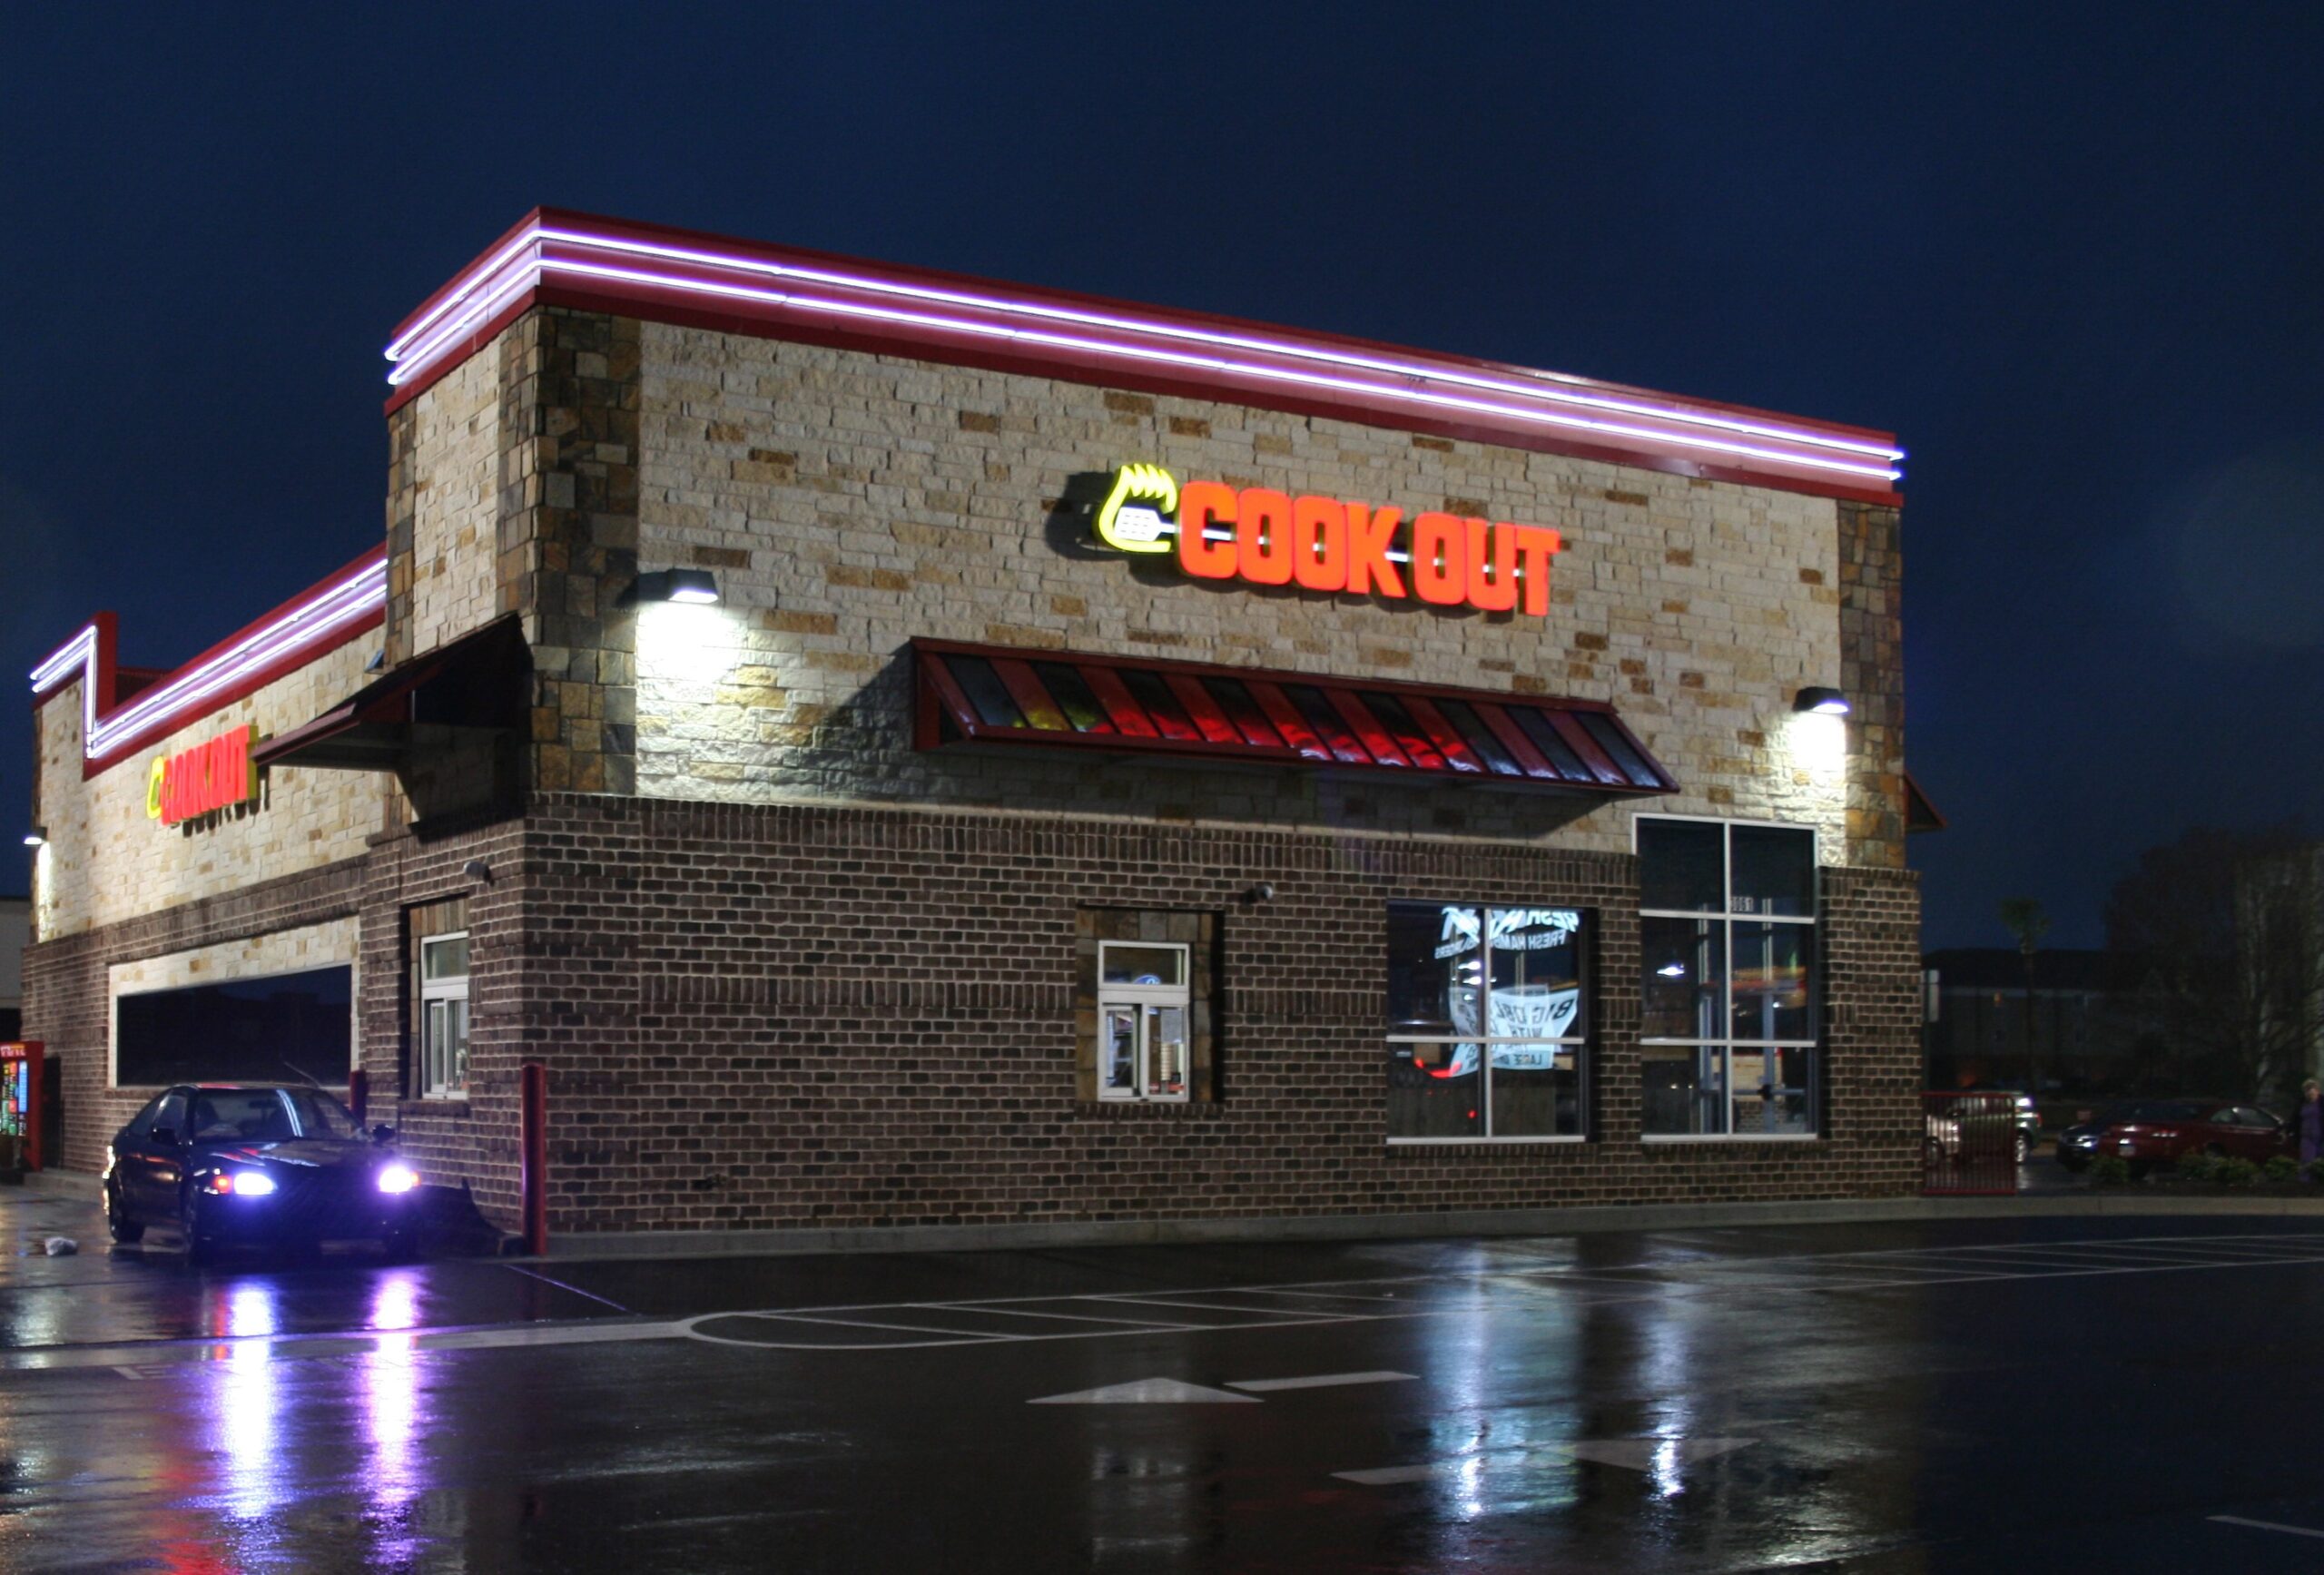 Cook Out Restaurant